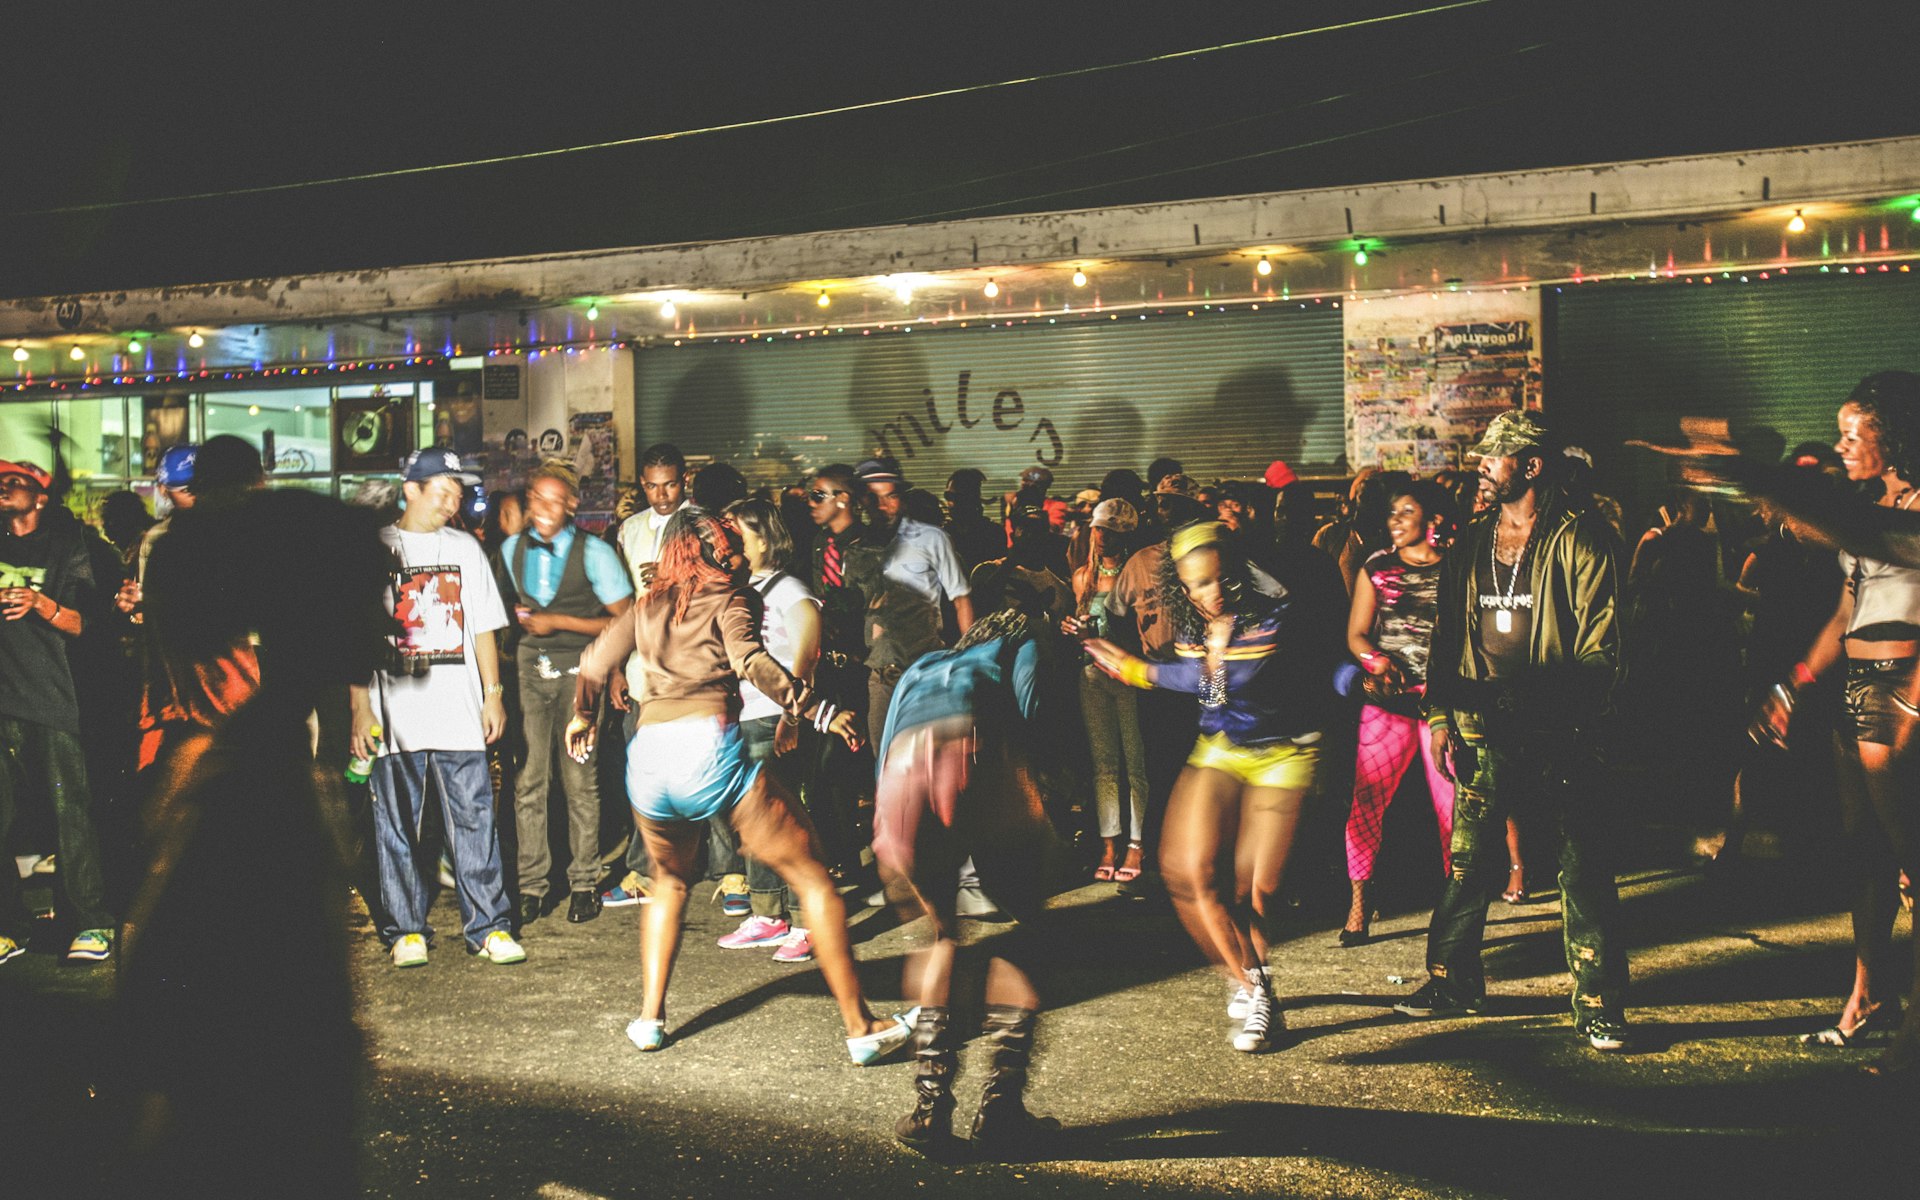 People gathered together at a dancehall street party, dancing and celebrating